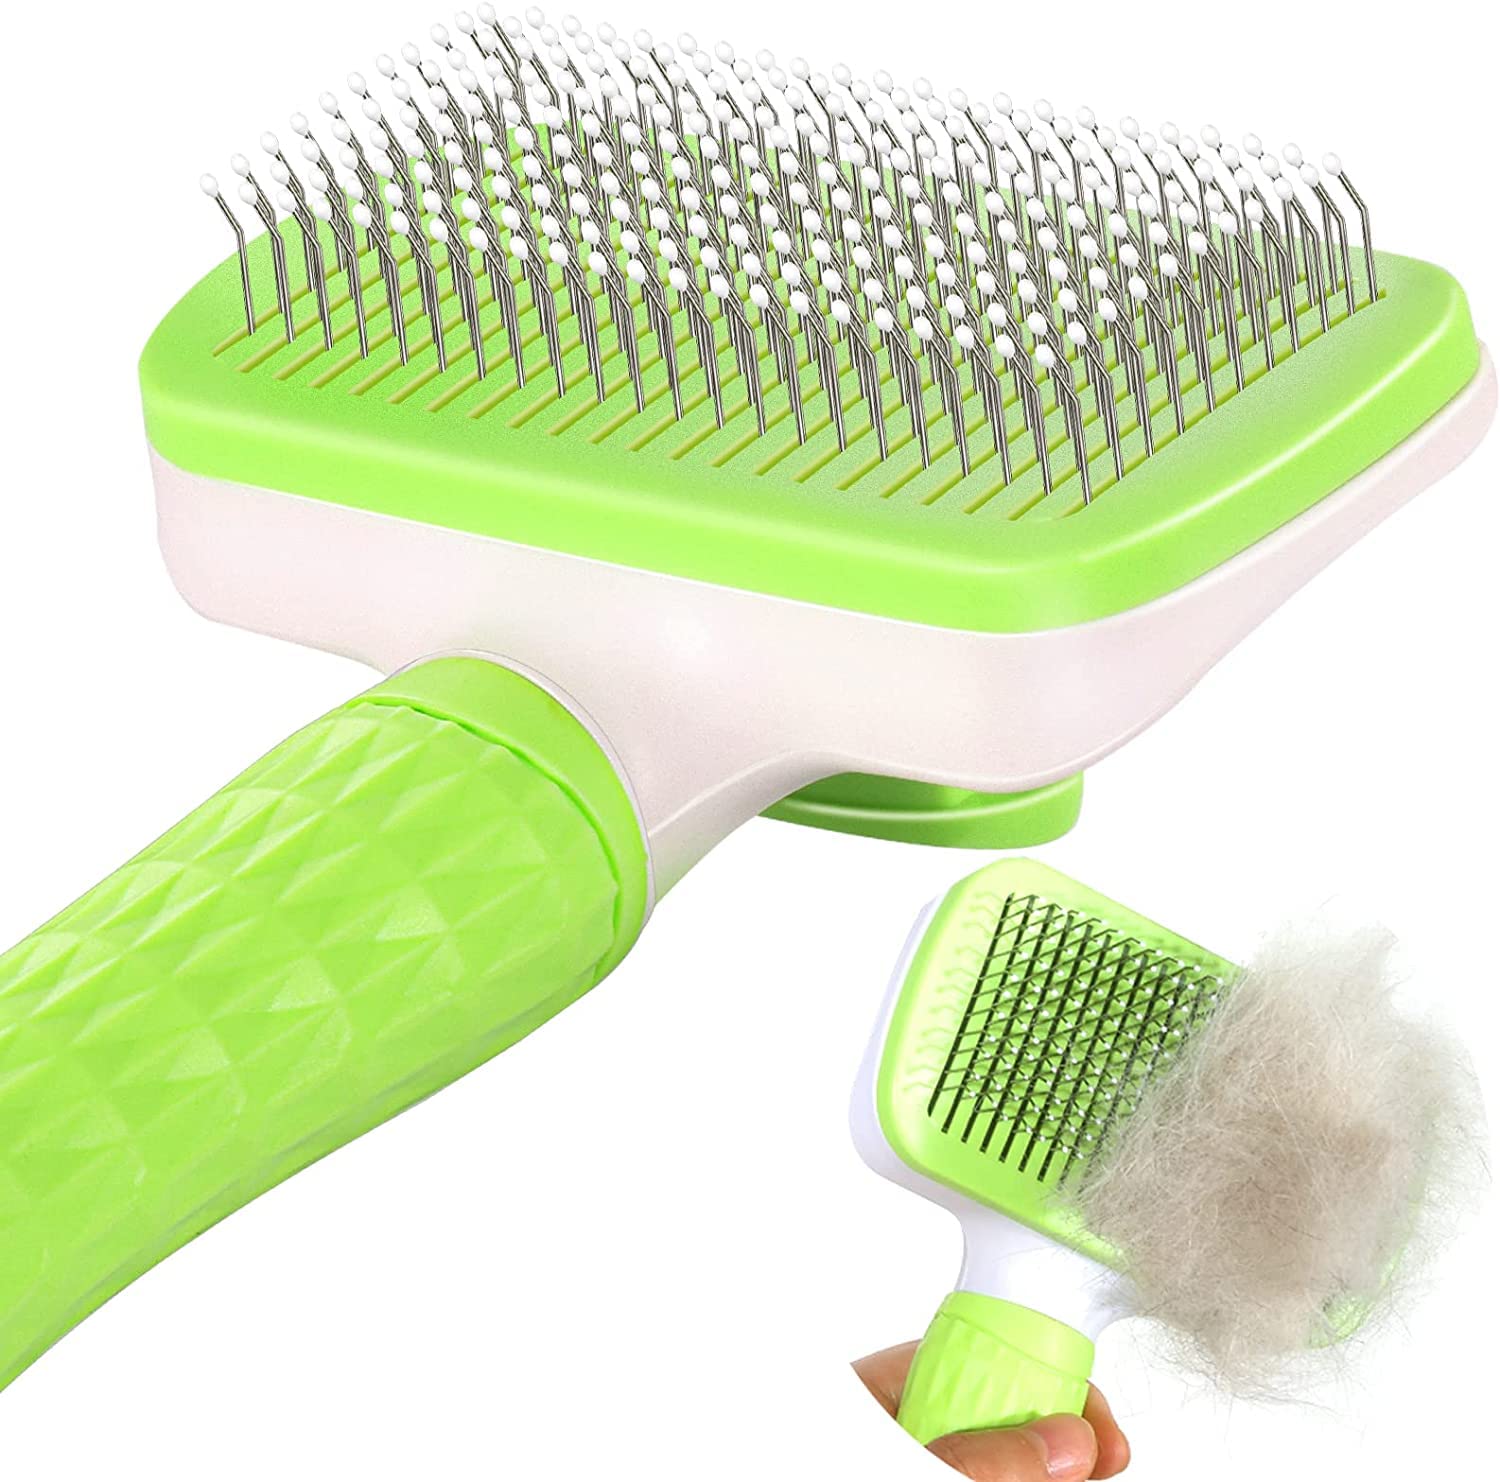 Paw Prize Dog Brush, Cat Brush, Dog Brush for Shedding, Self-Cleaning Pet Brush for Grooming Long and Short Haired Dogs and Cats, Indoor Cat Brushes for Dogs, Cats, Rabbits, Removing Loose Fur and Coat inside